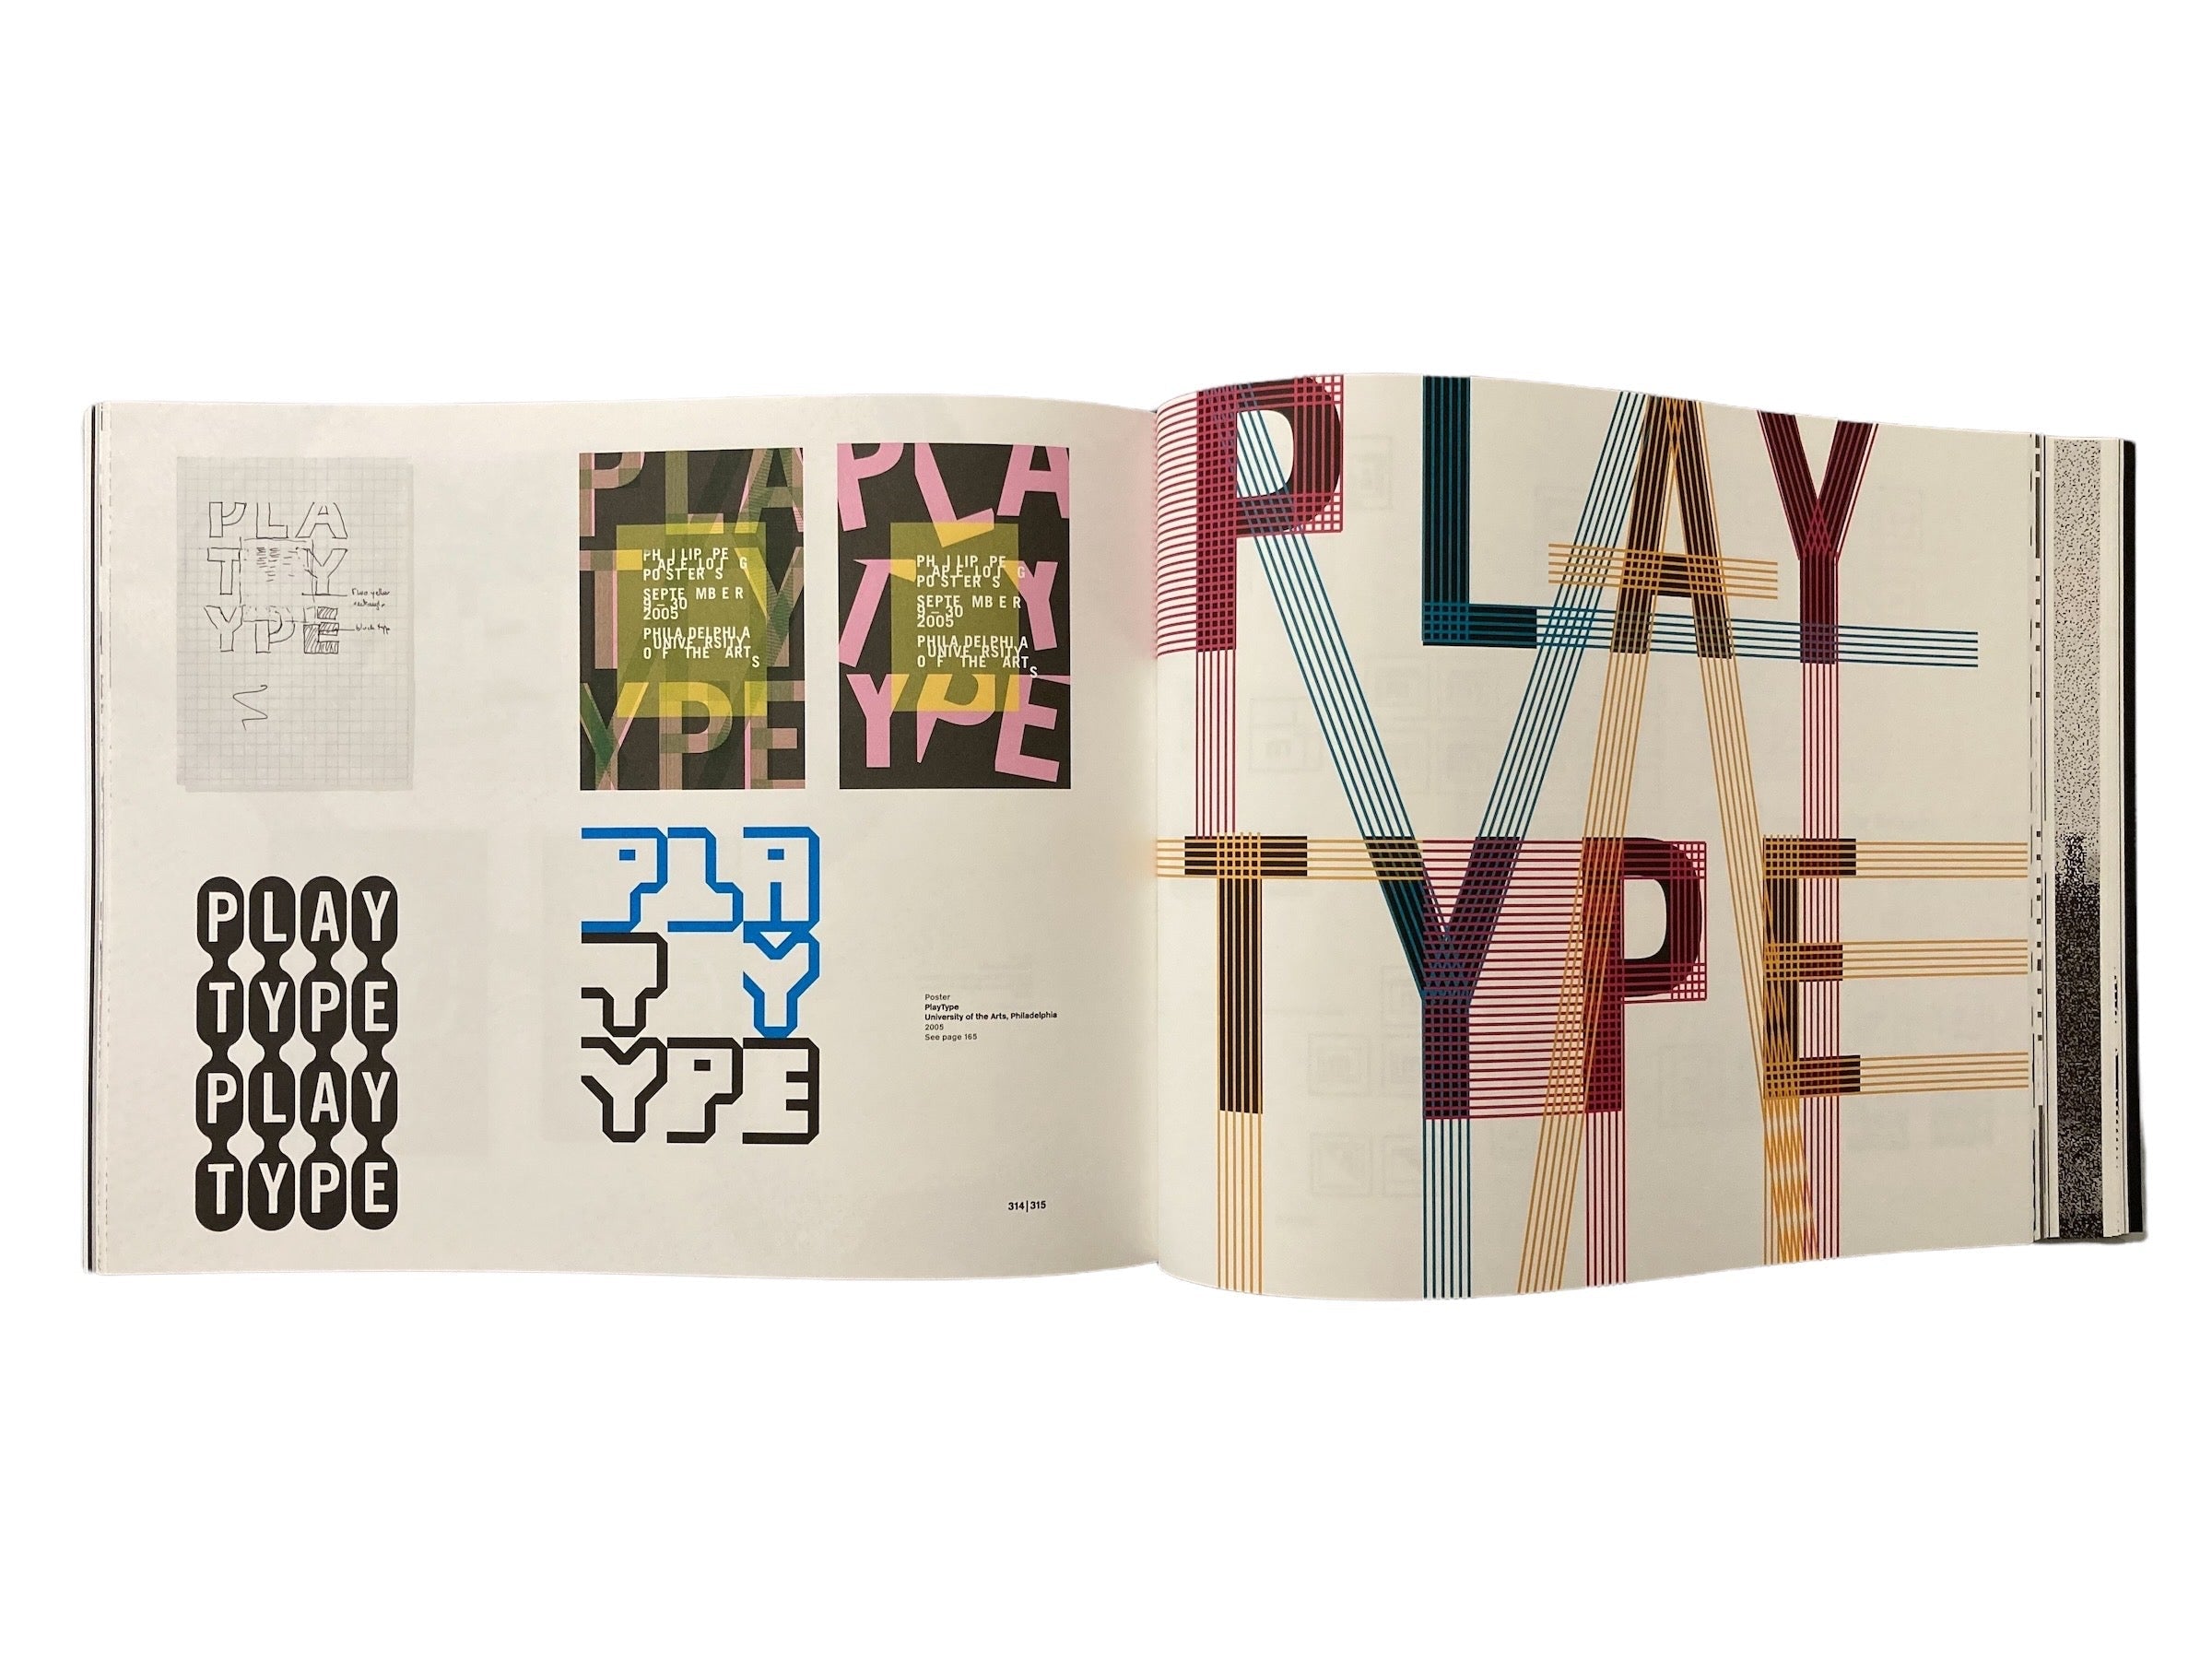 Typorama: The Graphic Work of Philippe Apeloig (Non-mint)